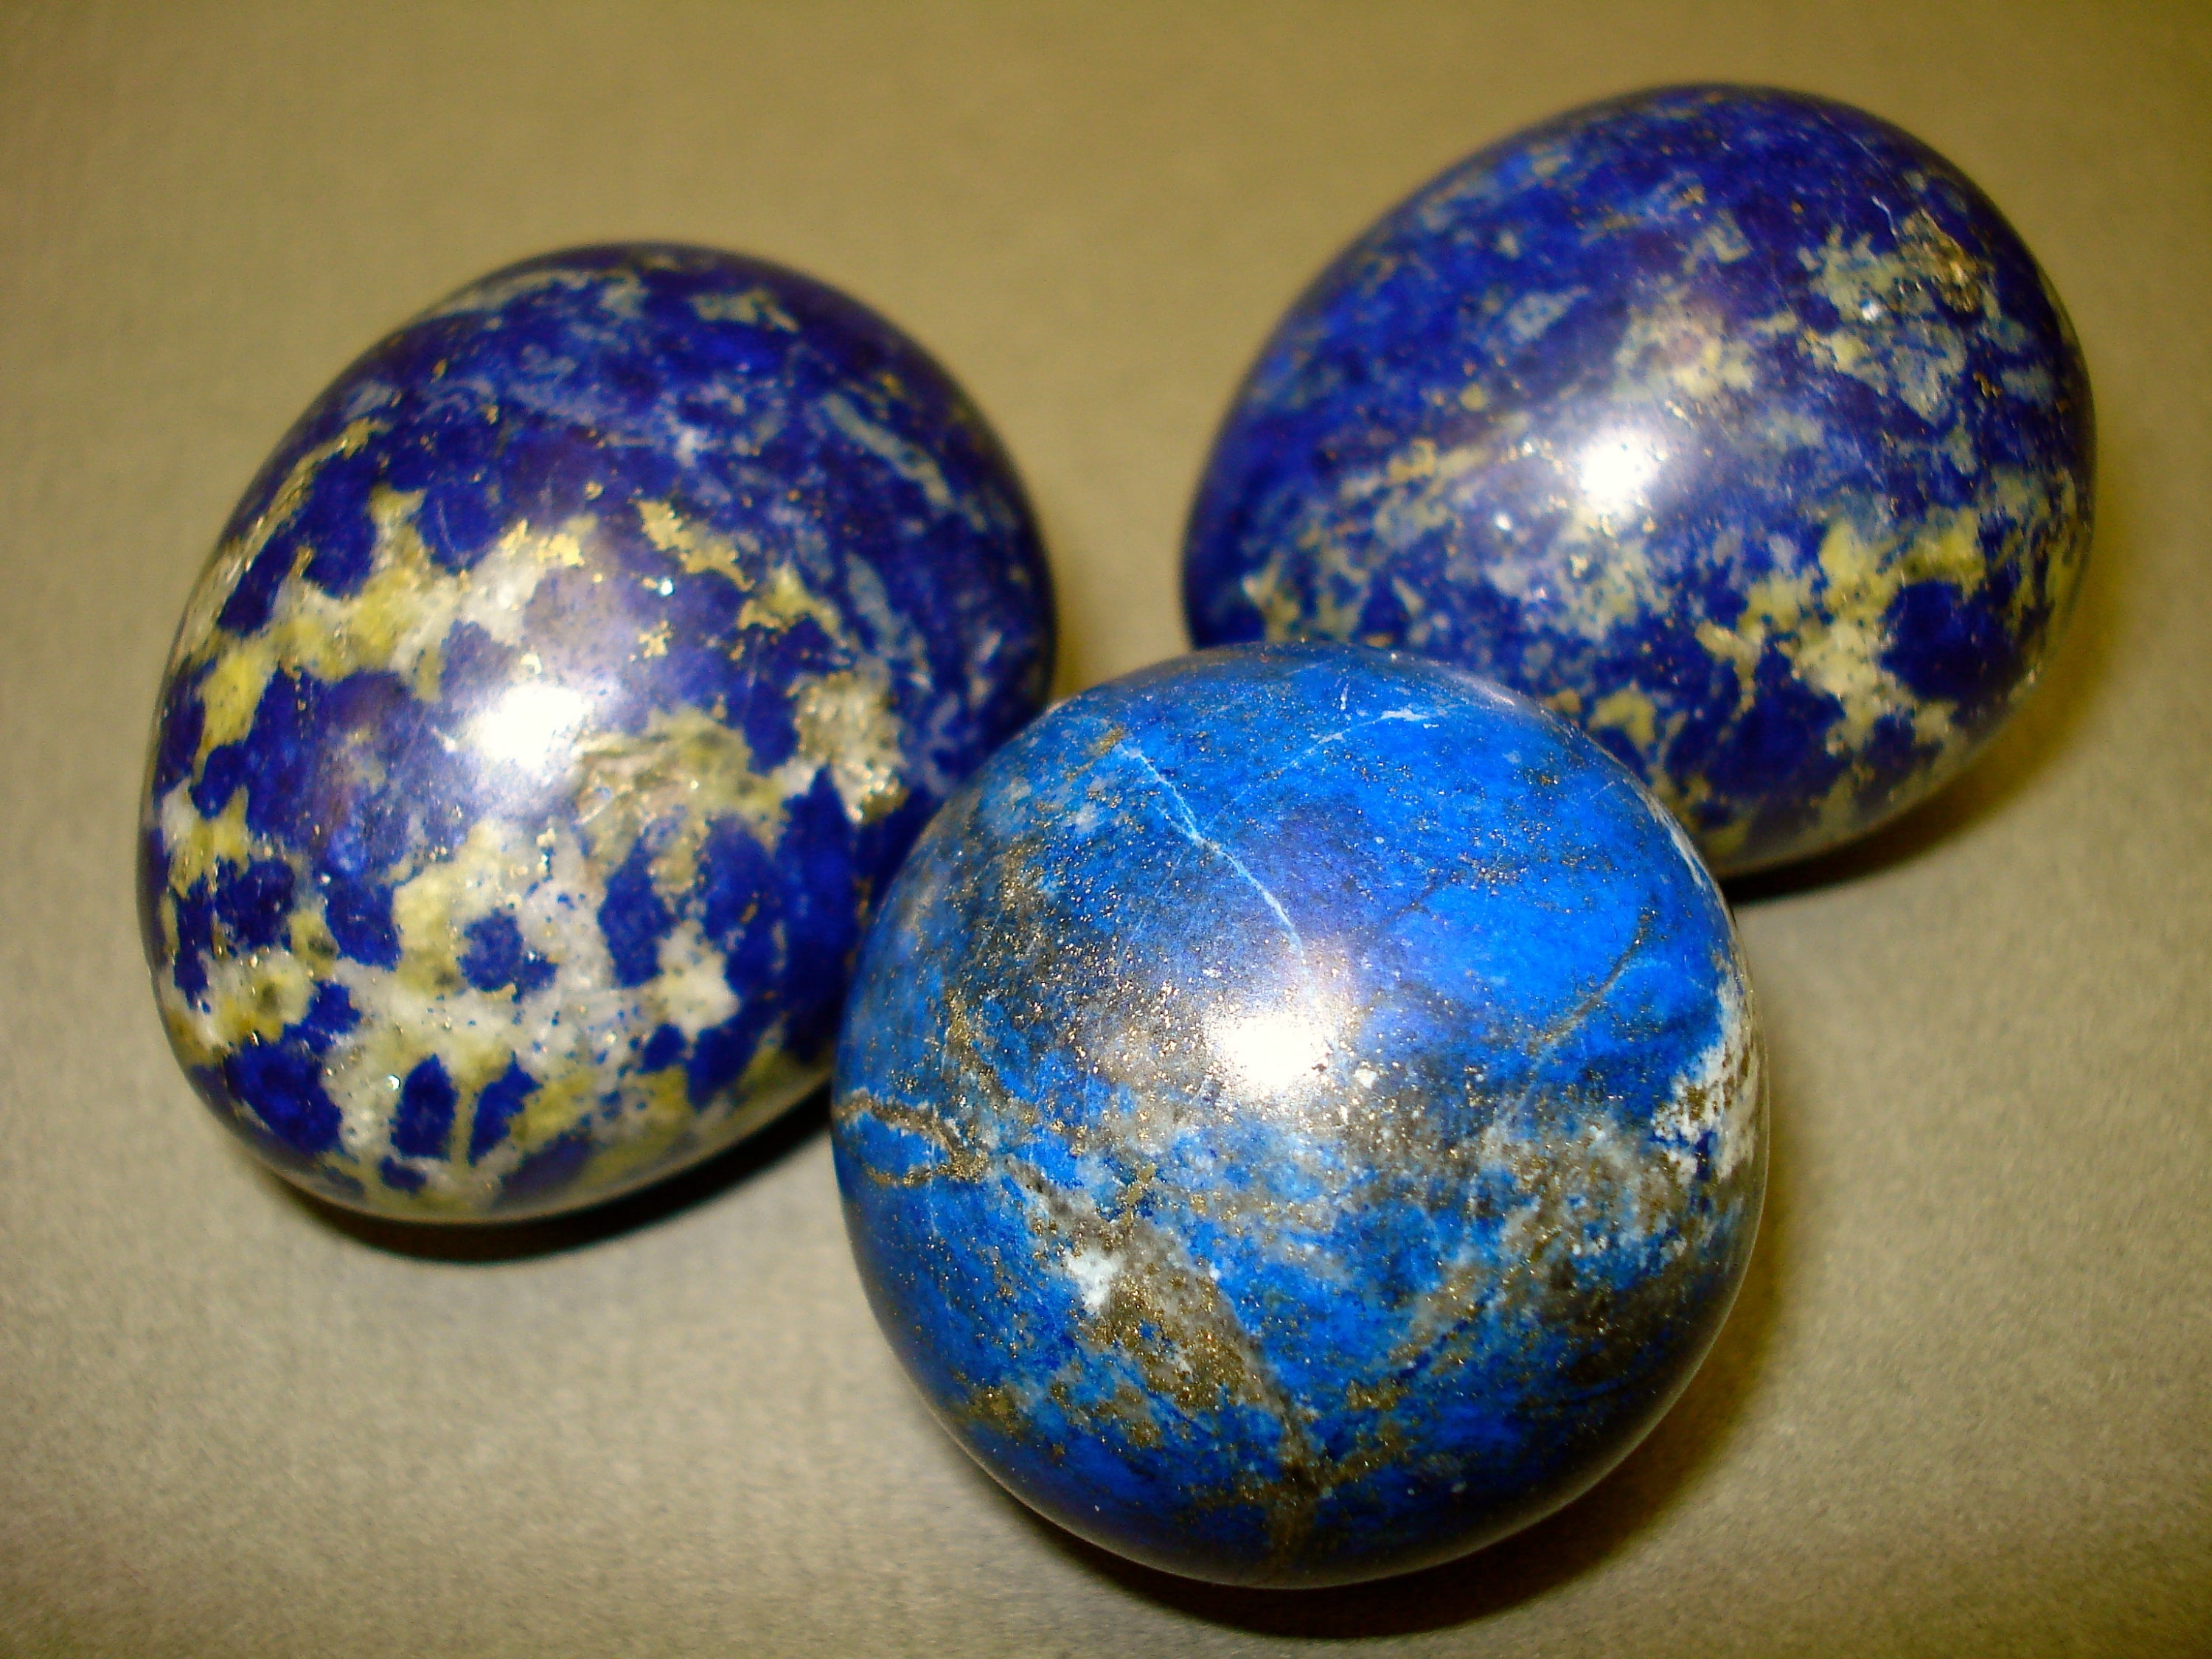 Lapis Lazuli Eggs and Sphere next to a penny for size comparison